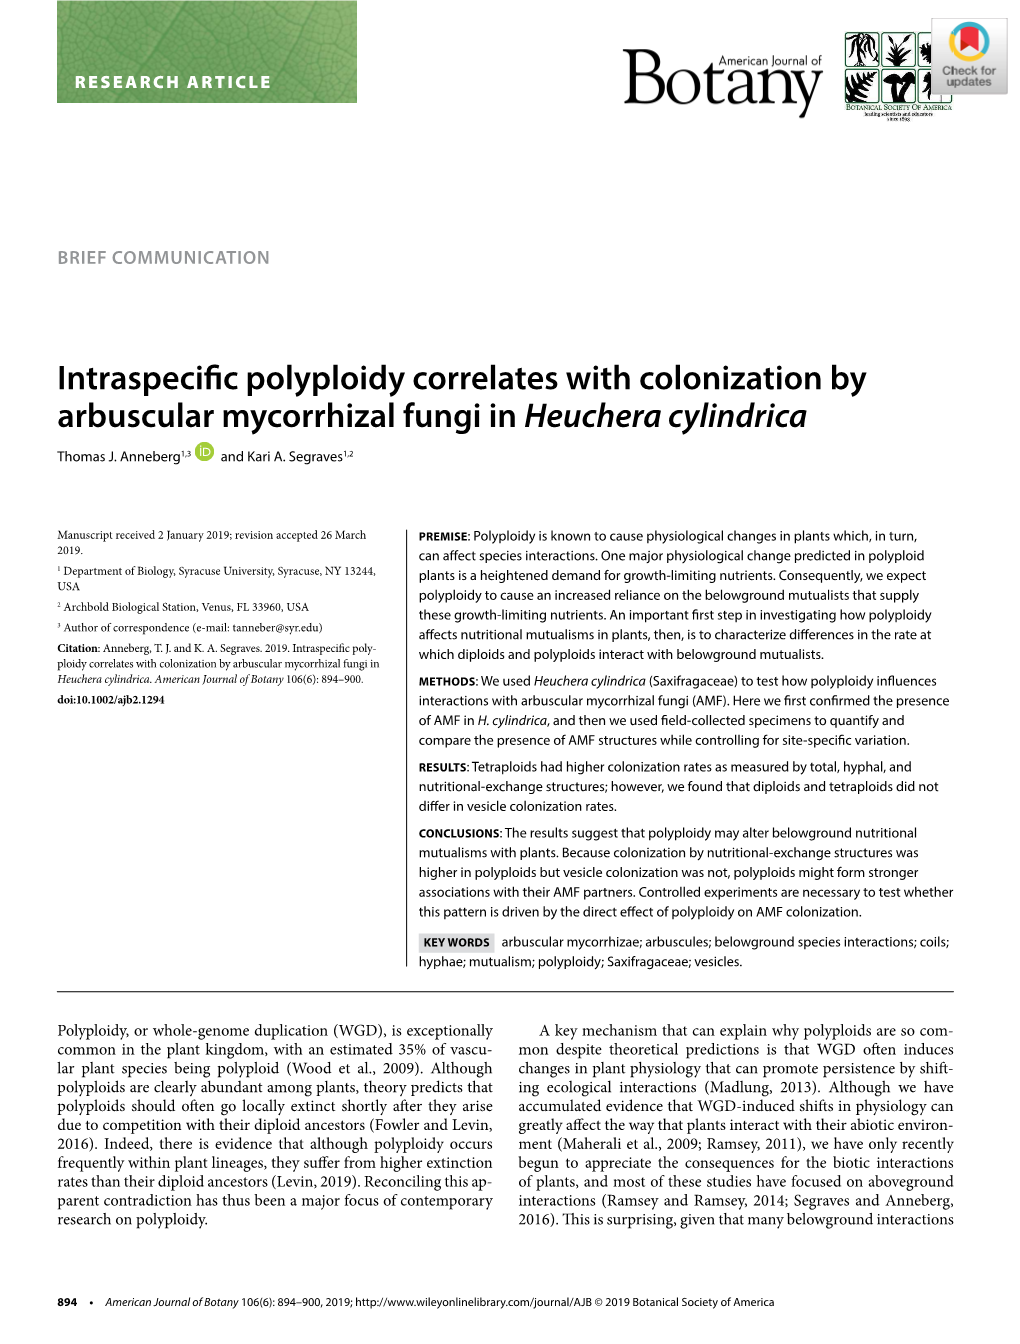 Intraspecific Polyploidy Correlates with Colonization by Arbuscular